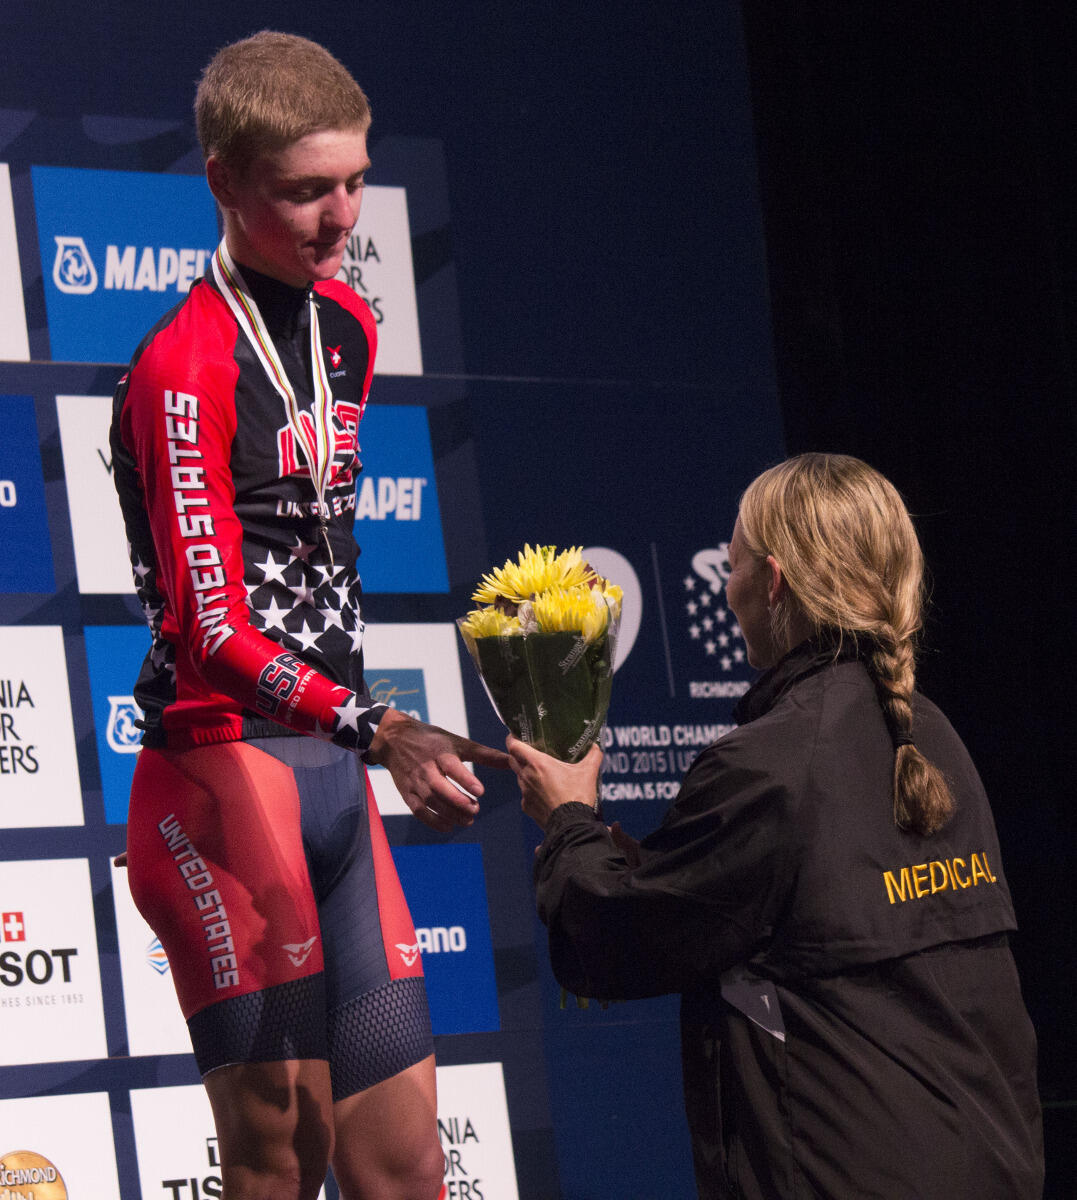 Rebecca Moran, D.P.T., hands flowers to Adrien Costa, a USA cyclist, during the medal ceremony for the men’s junior individual time trial. Costa came in second place.